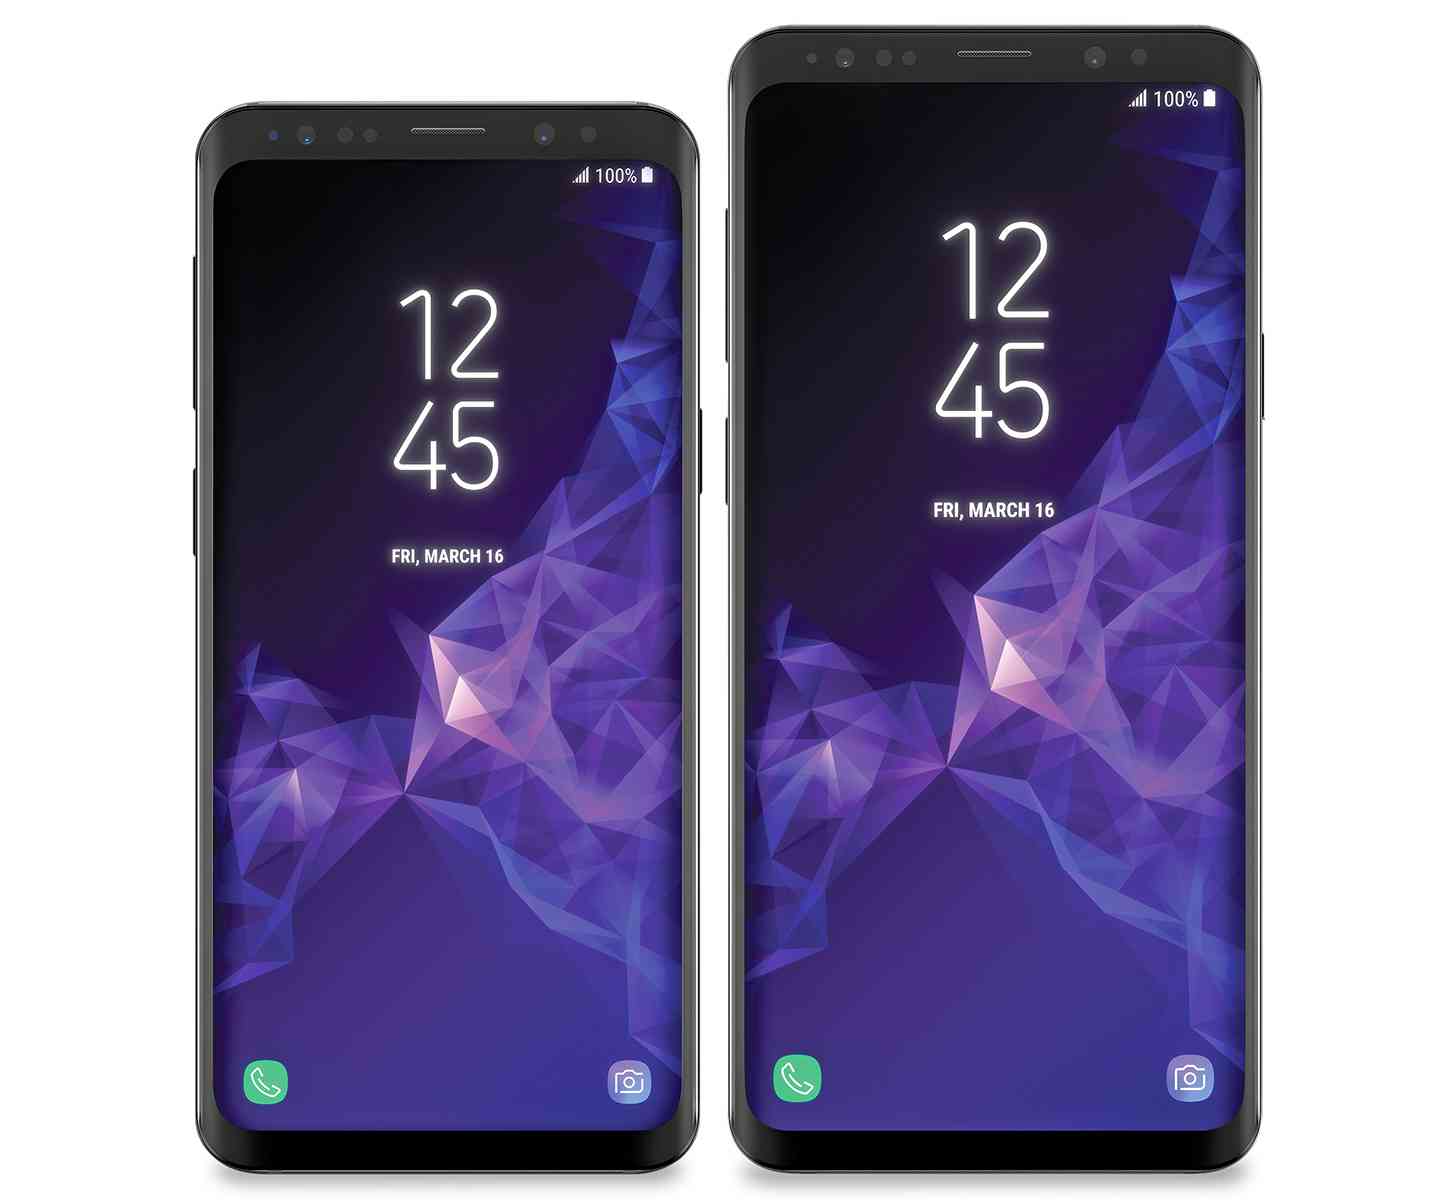 Samsung Galaxy S9 and Galaxy S9+ images leak